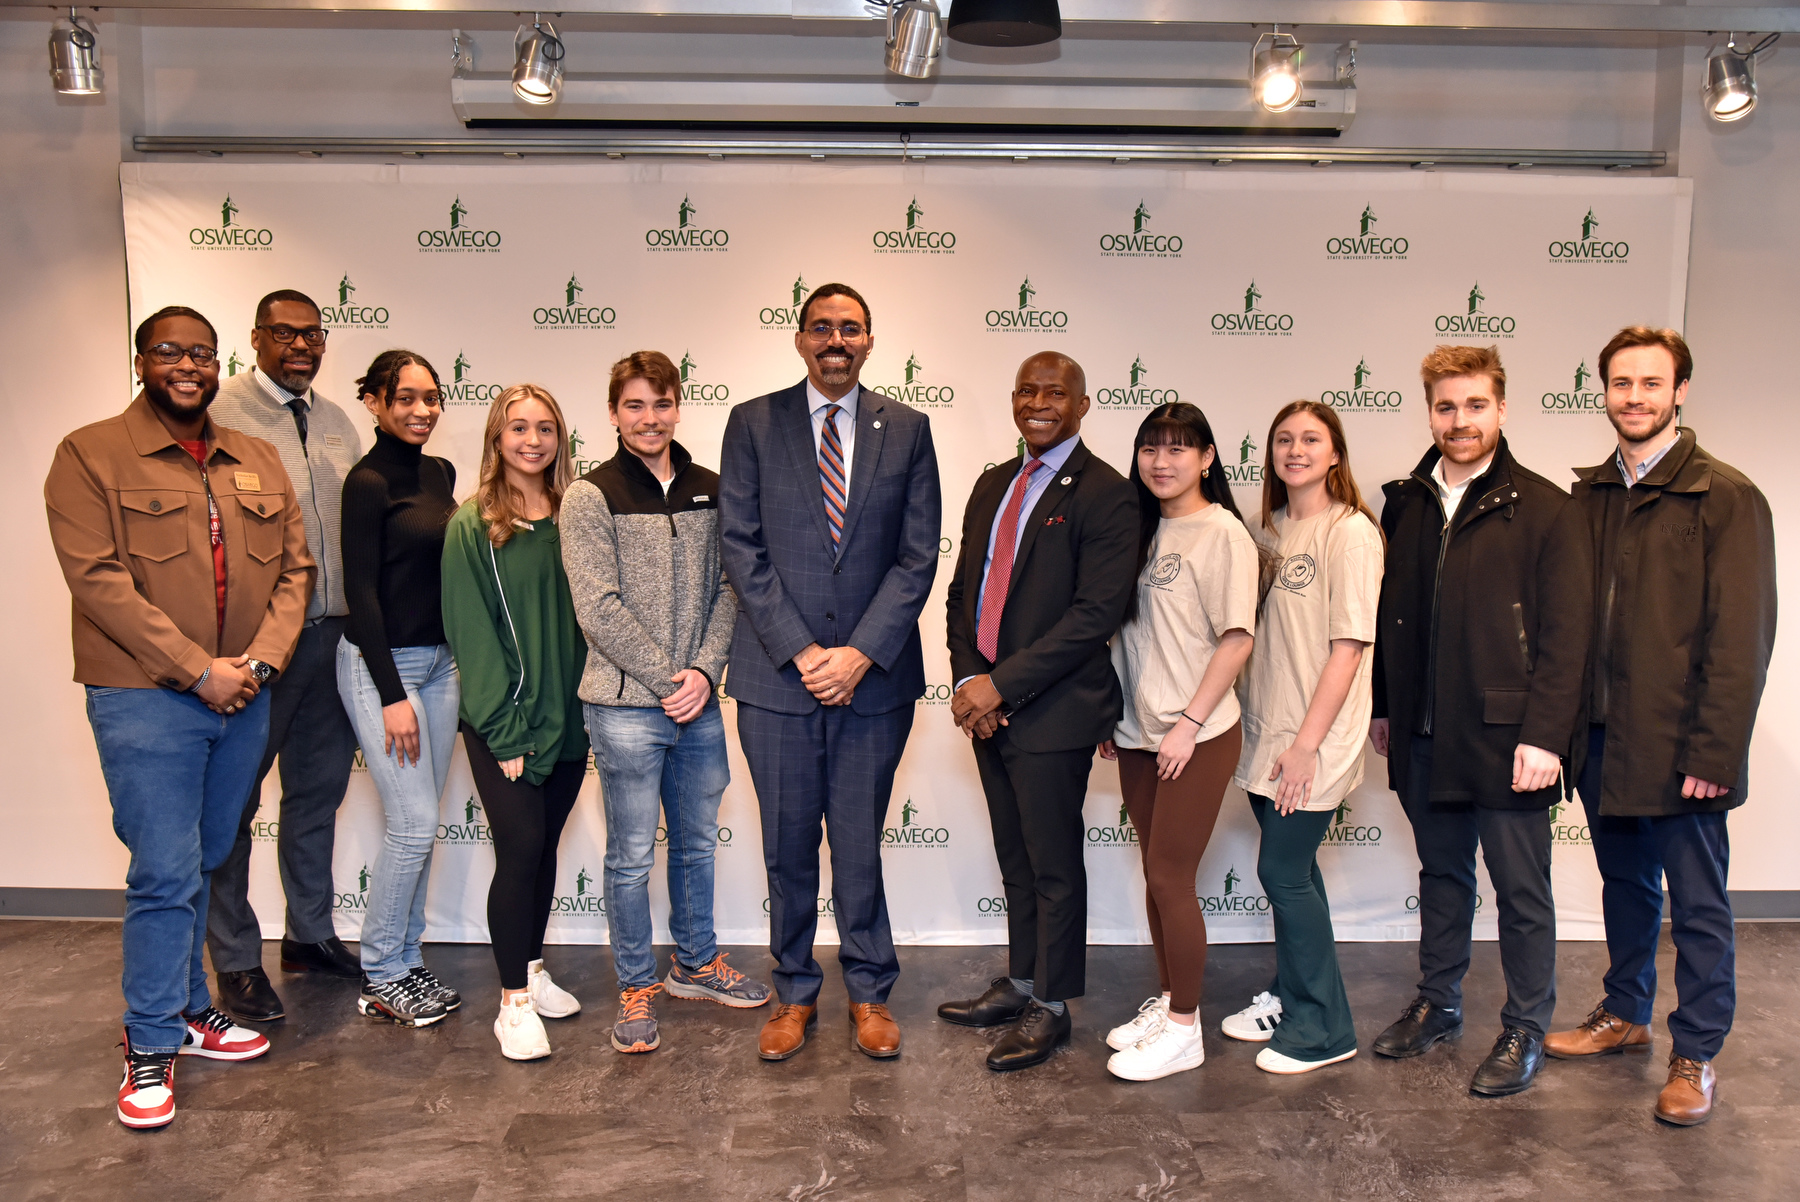 After SUNY Chancellor John B. King Jr. hosted a press conference on enhanced mental health support funding to Oswego and other SUNY institutions, he and President Peter O. Nwosu gathered for a group photo with students in The Space.